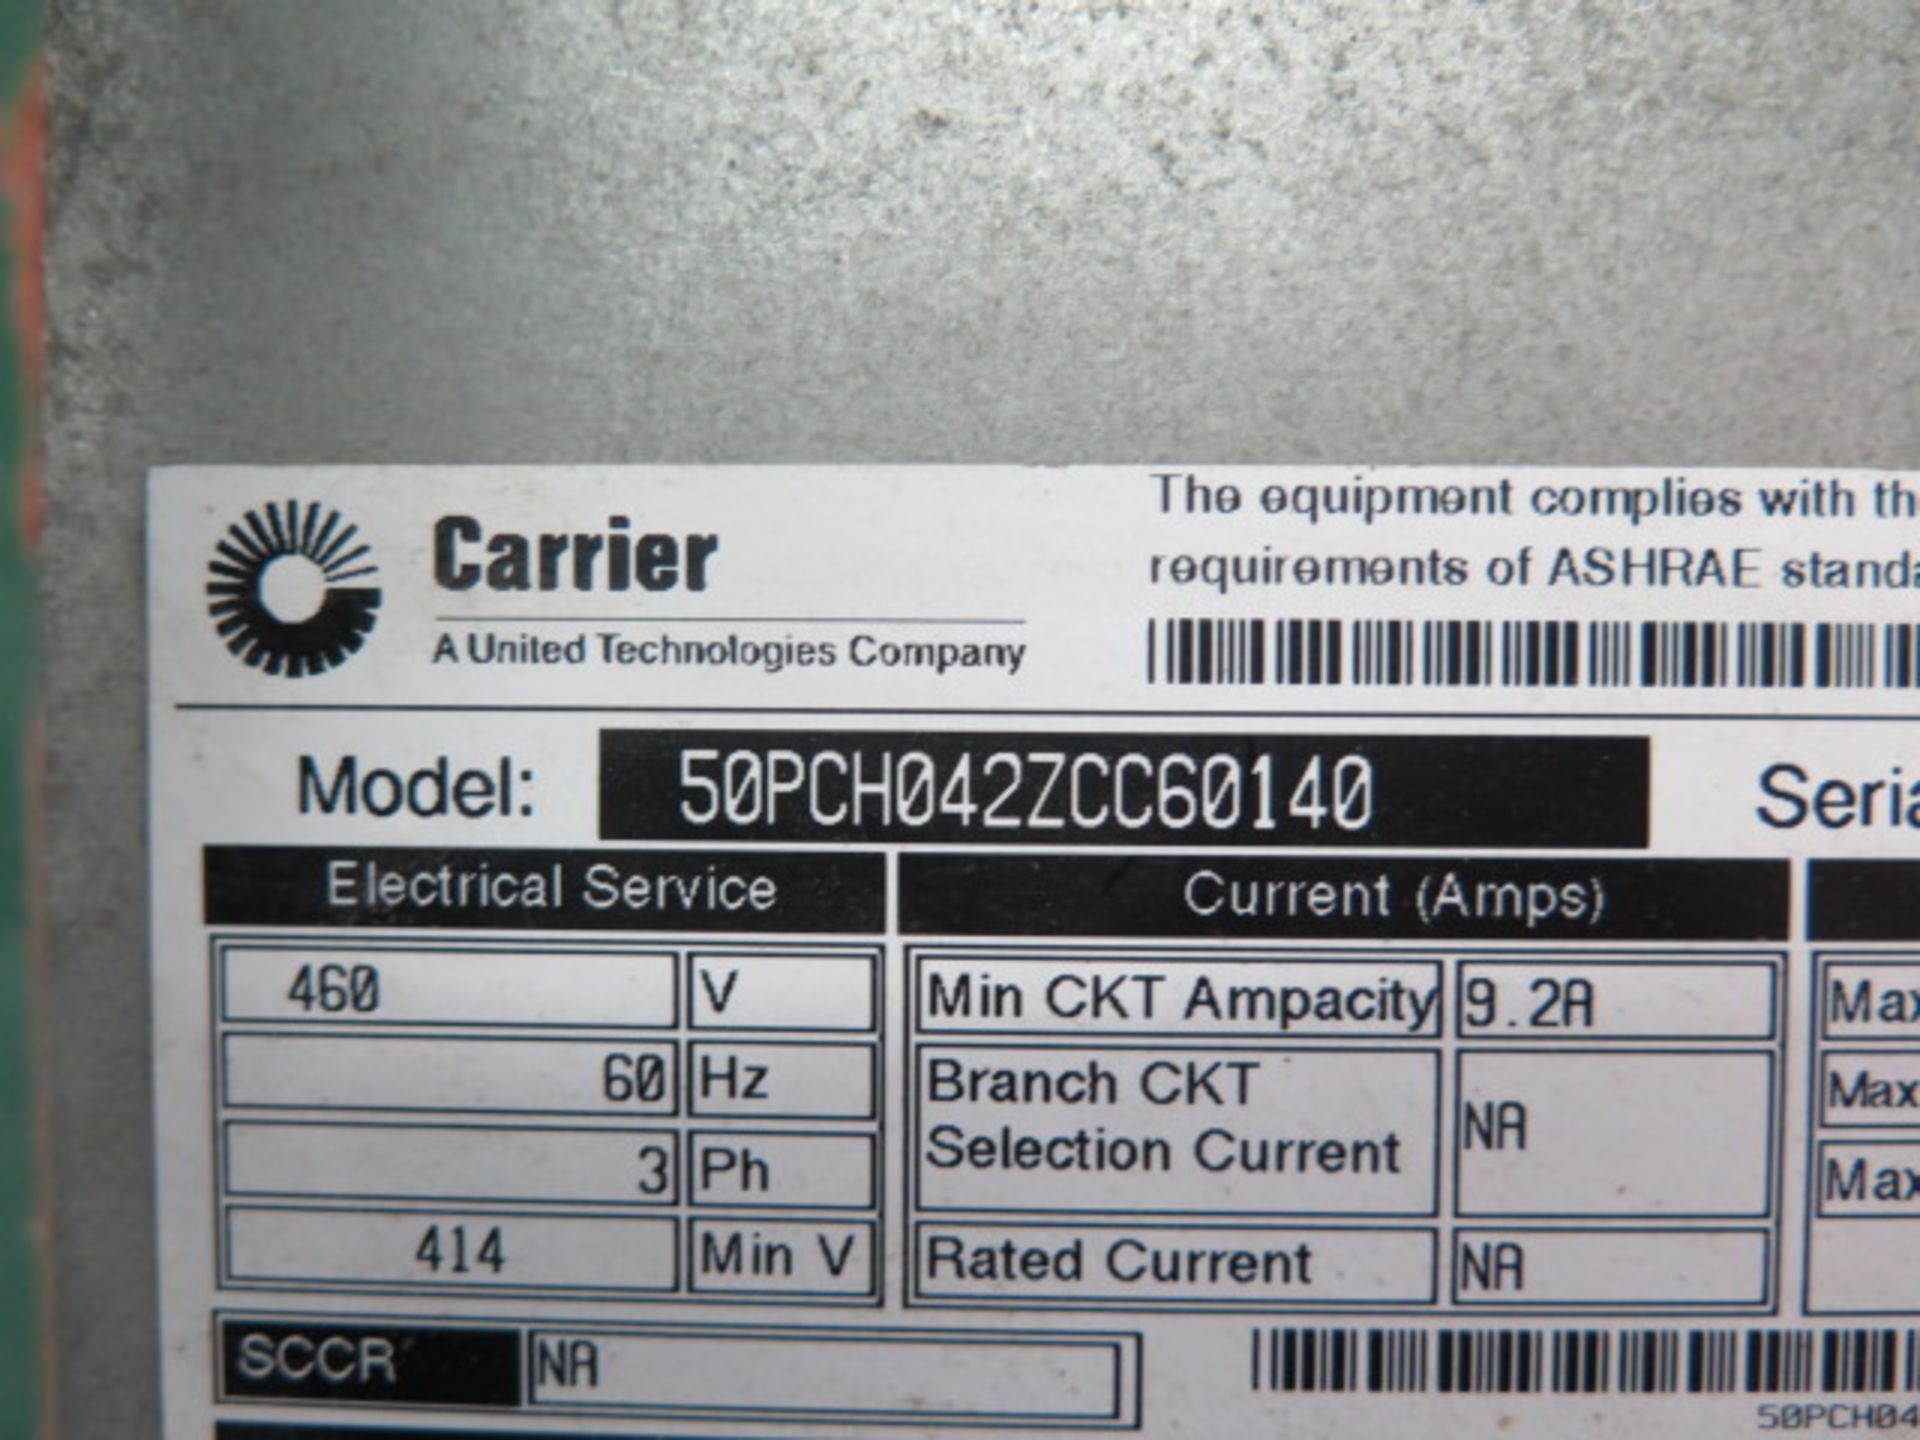 Carrier mdl. 50PCH042ZCC60140 3.5 Ton Heat Pump 460V-3ph - Image 2 of 3